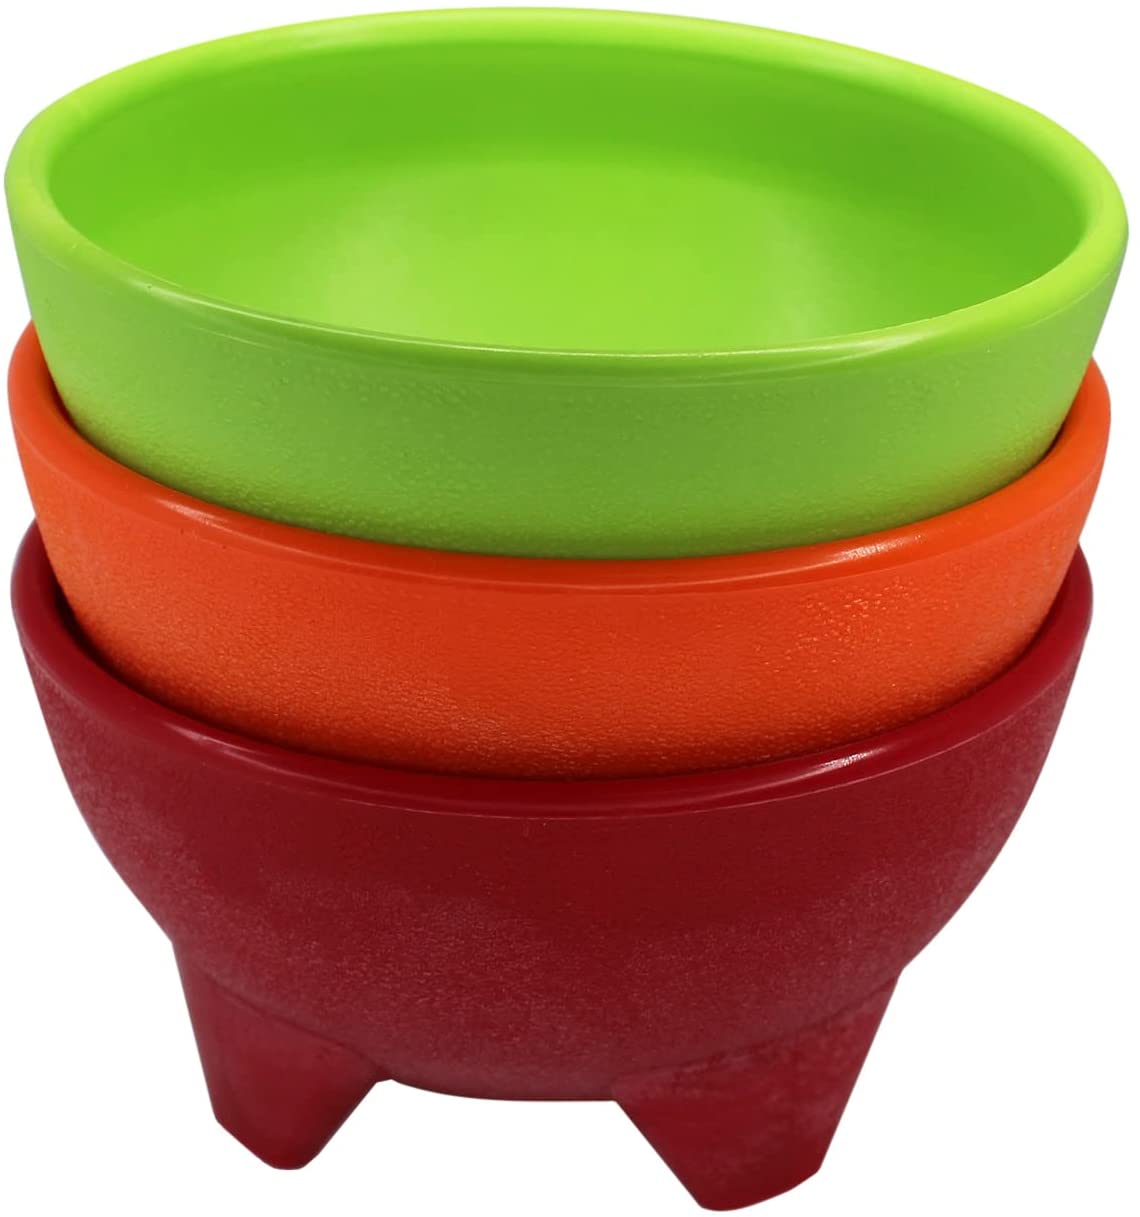 3-Piece 10-Oz Imusa USA Microwave Safe Plastic Salsa Dishes $3.59 + free shipping w/ Prime or on orders over $25